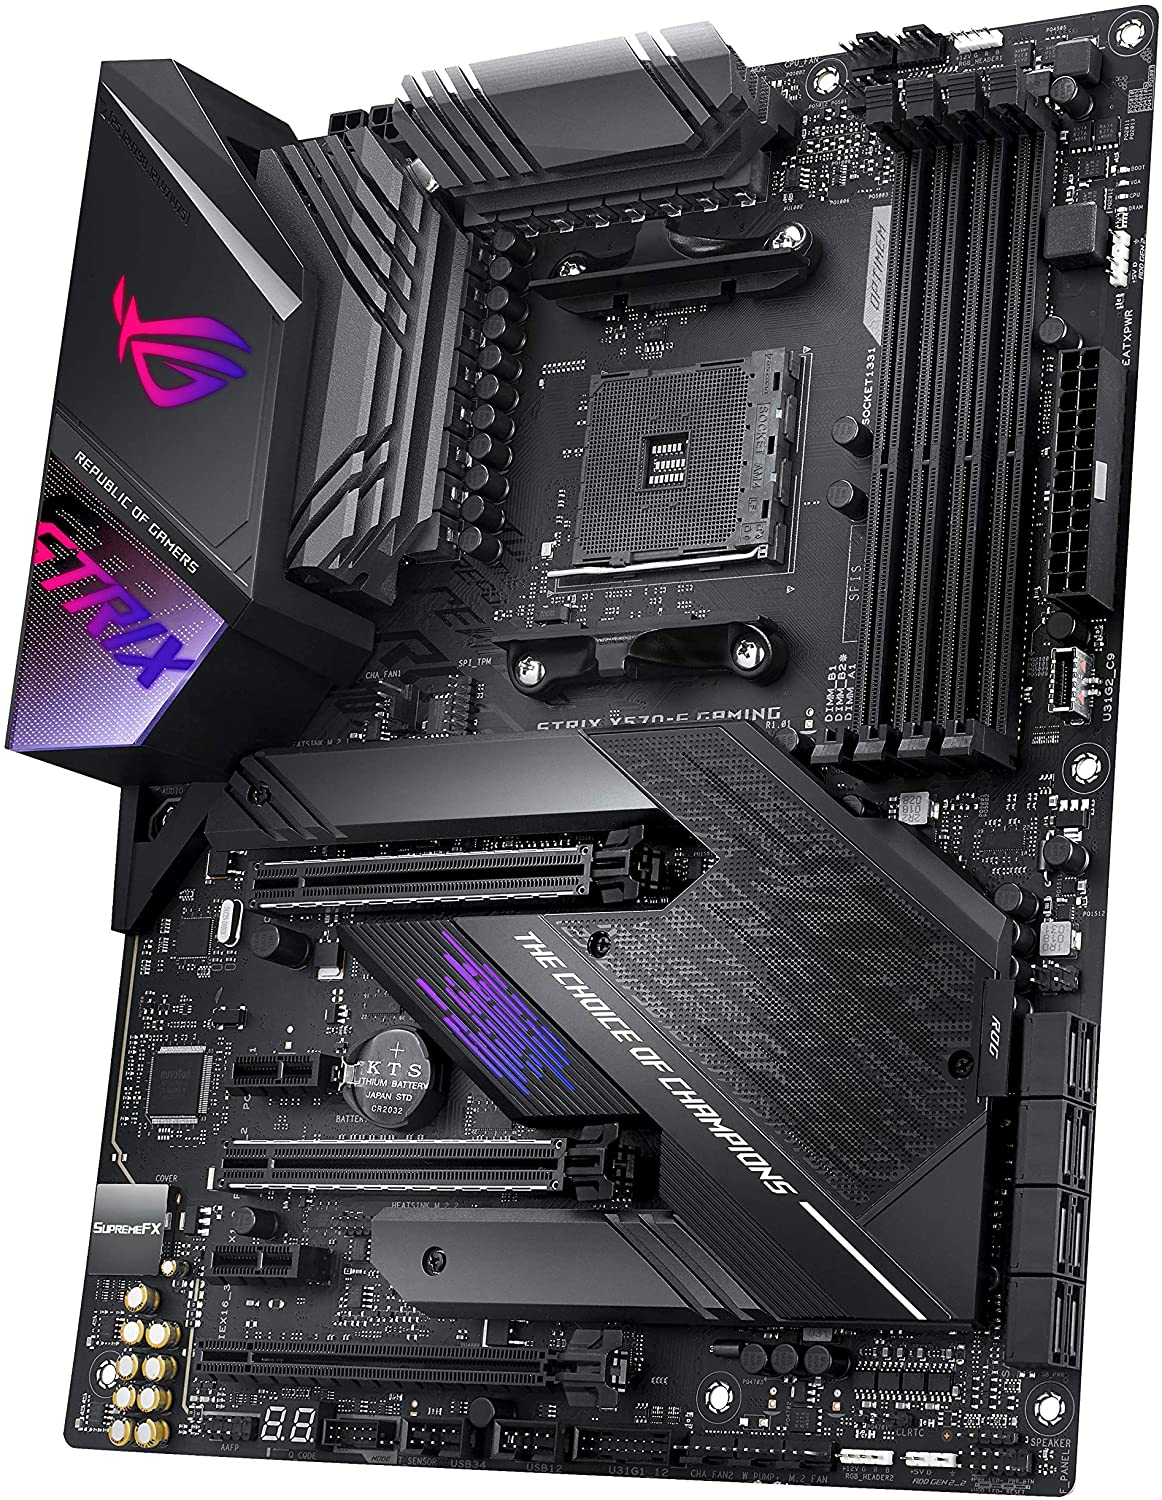 The ASUS ROG Strix X570-E Gaming Motherboard Review